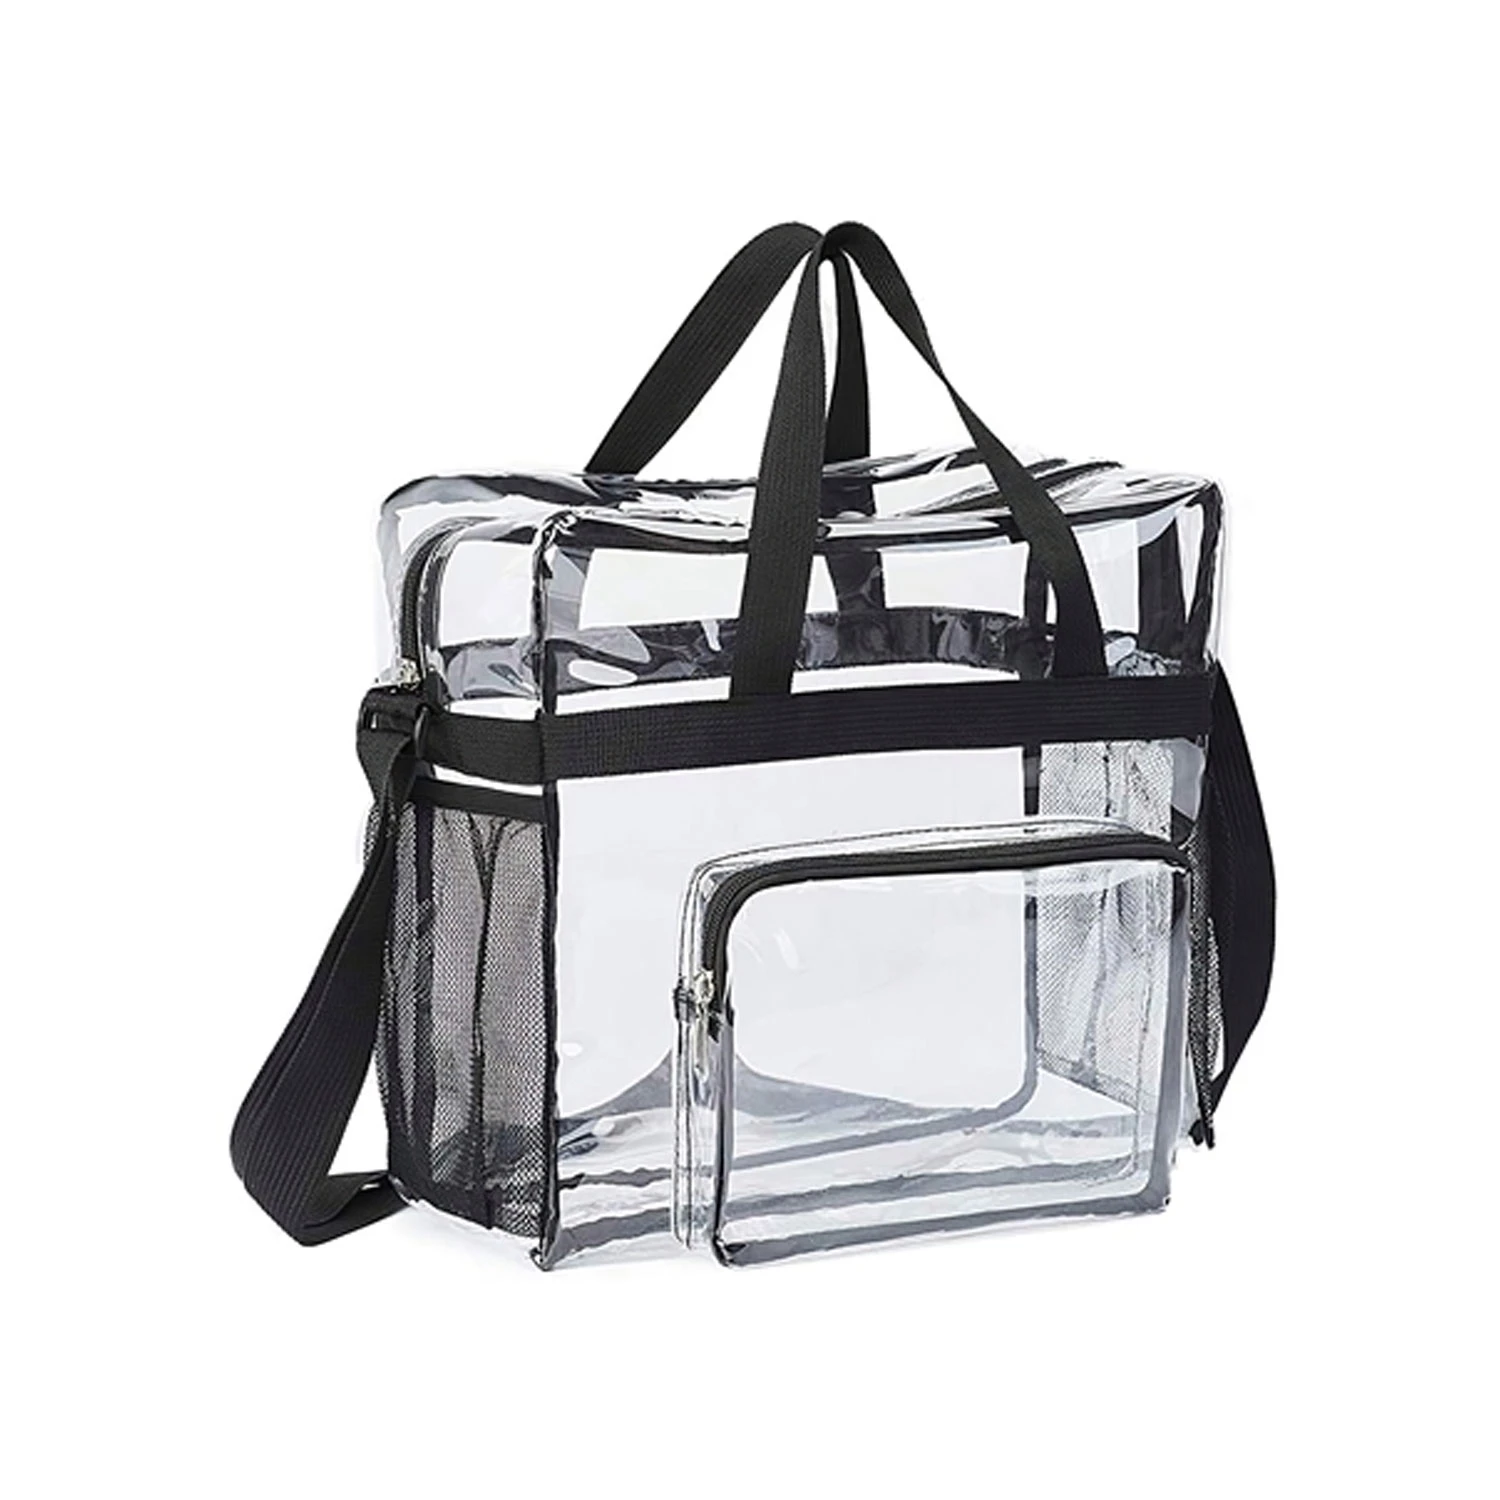 Clear Crossbody Bag Stadium Approved Clear Transparent Shoulder Bag See Through Zip Pouch Tote Bag